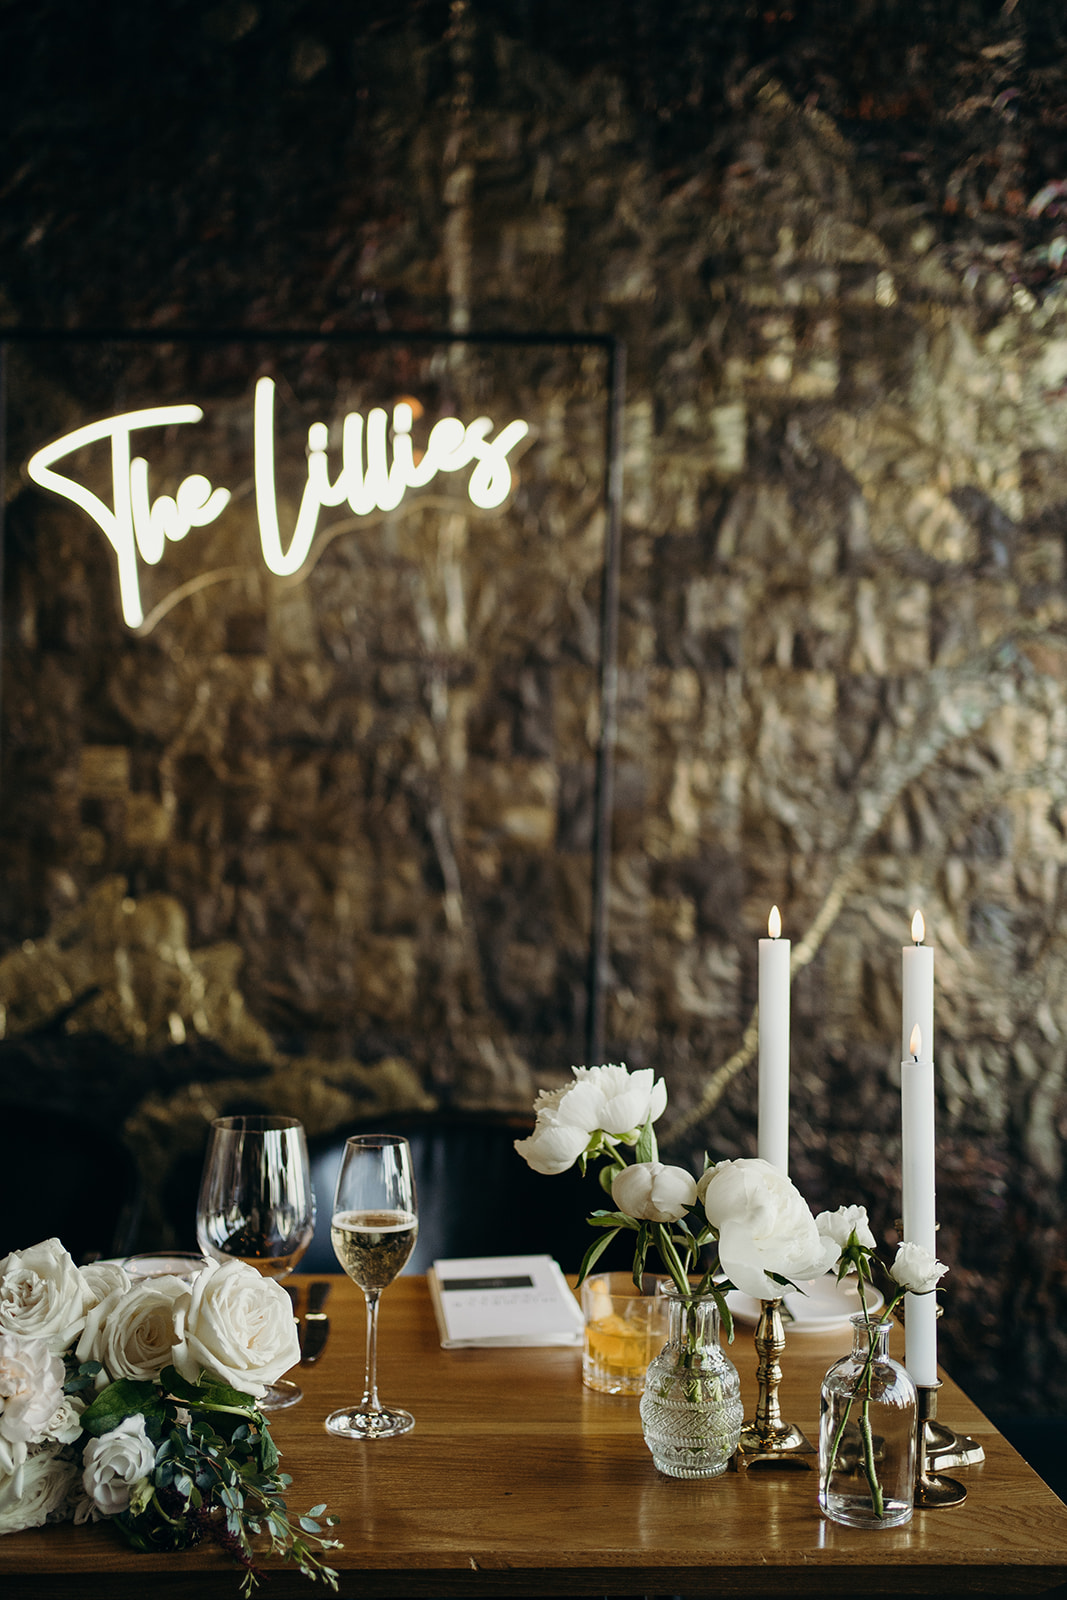 Candles and flowers on the table with a lit up sign hung on a on brick wall.